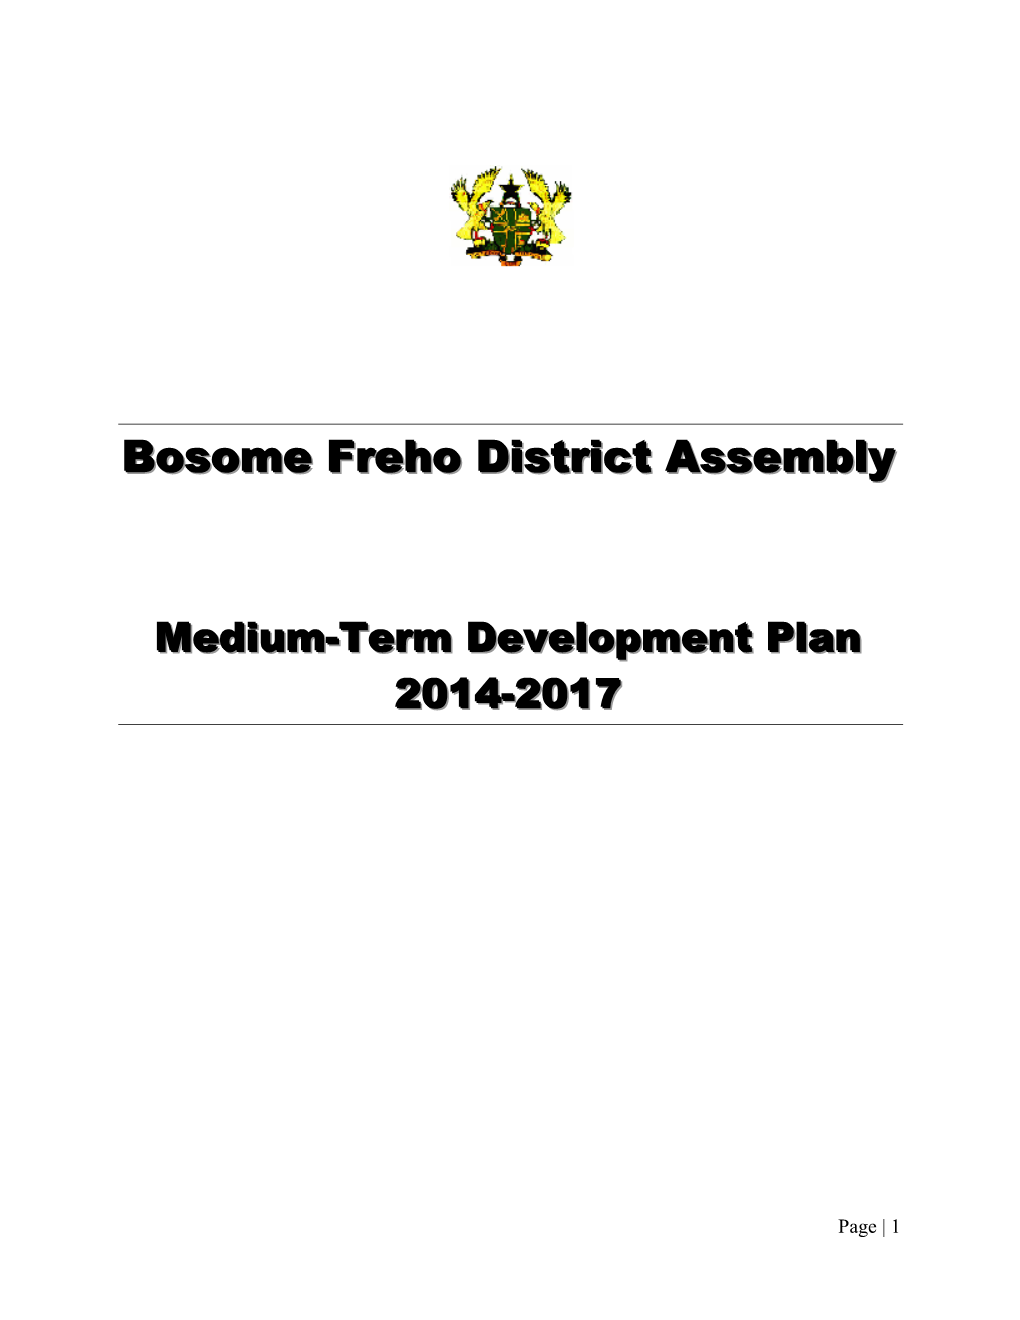 Bosome Freho District Assembly Is to Be a Unique District with Sustainable Performance in All Aspects of Service Delivery in Its Statutory Functions